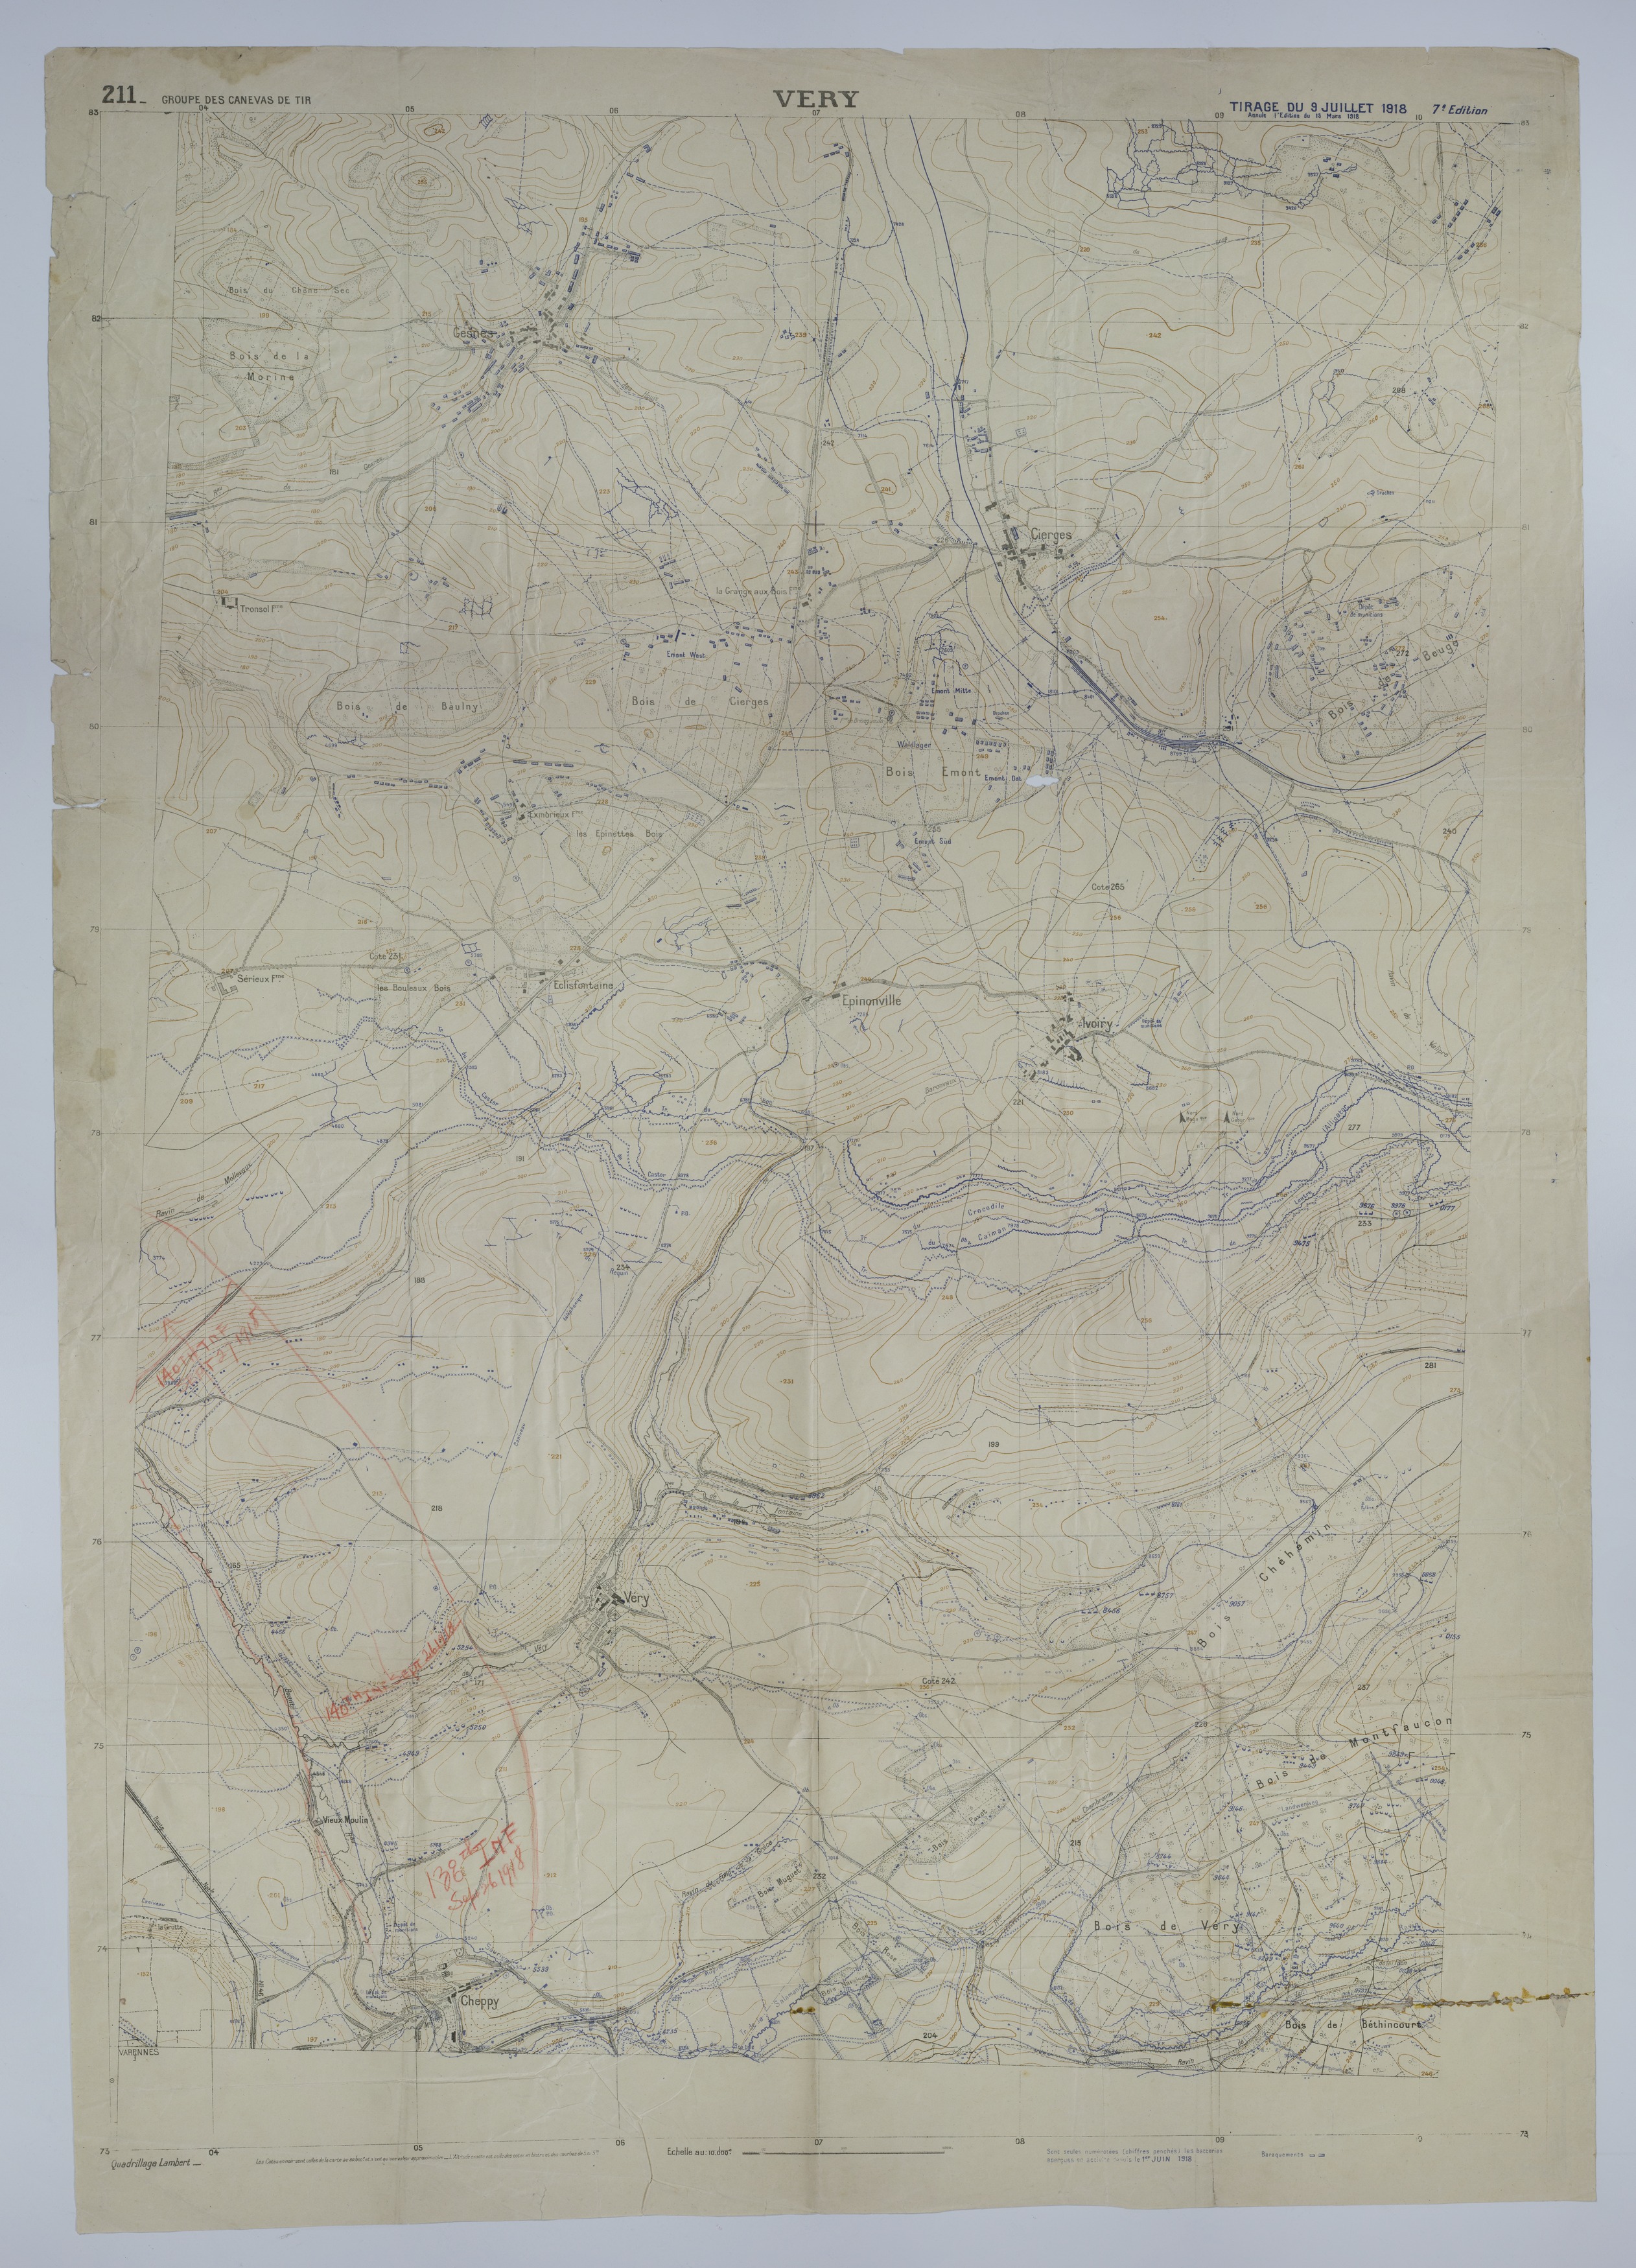 Map of 35th Division Movement During the Meuse-Argonne Offensive